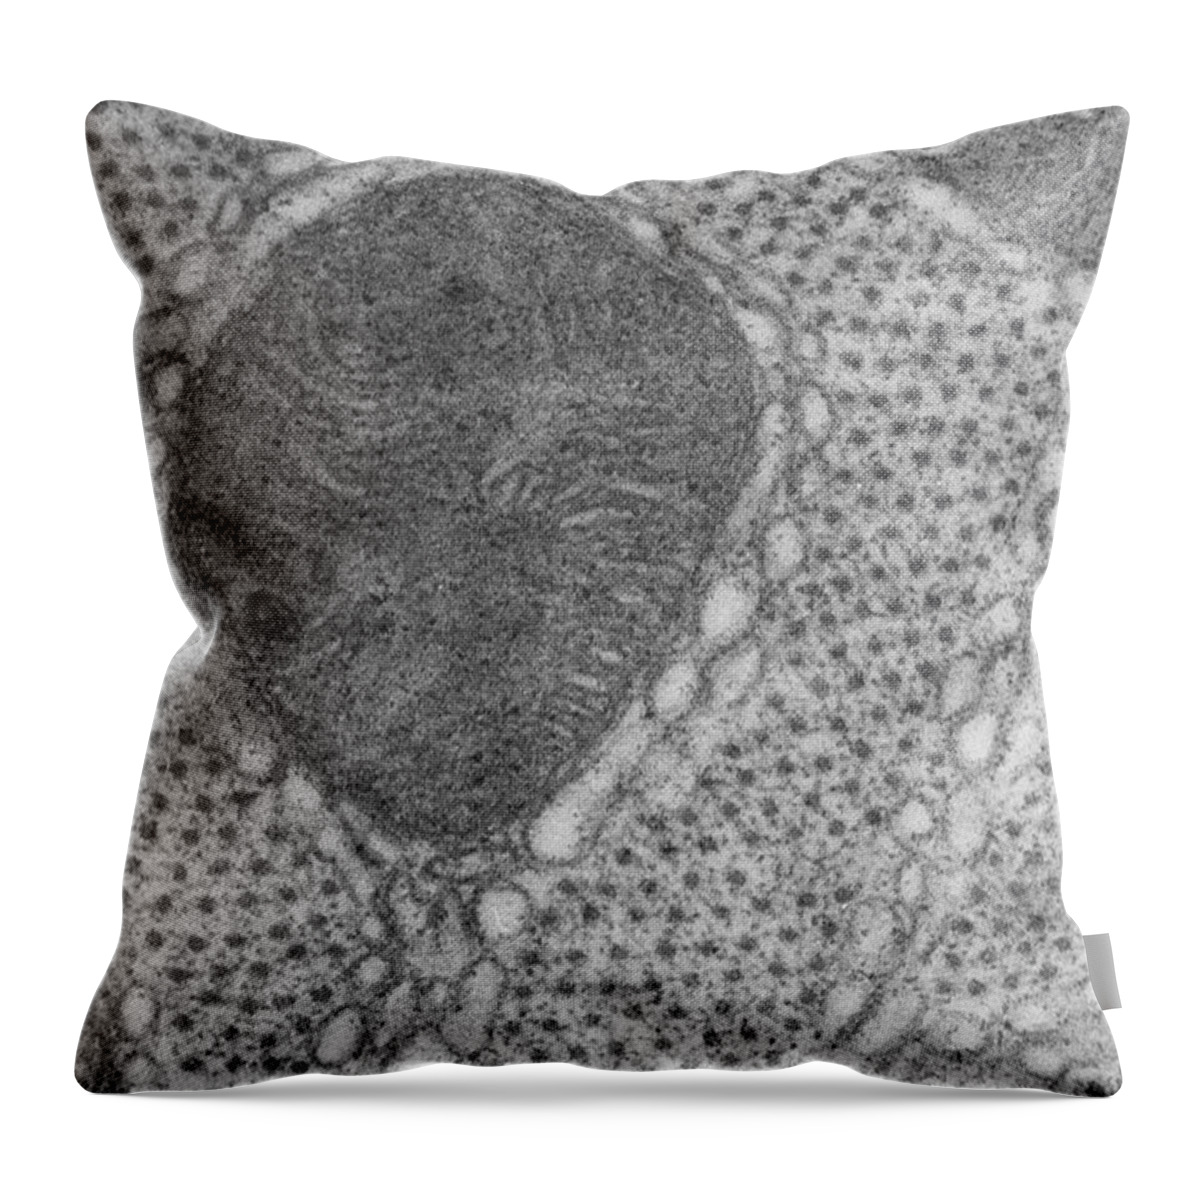 Histological Throw Pillow featuring the photograph Muscle, Tem by Biology Pics